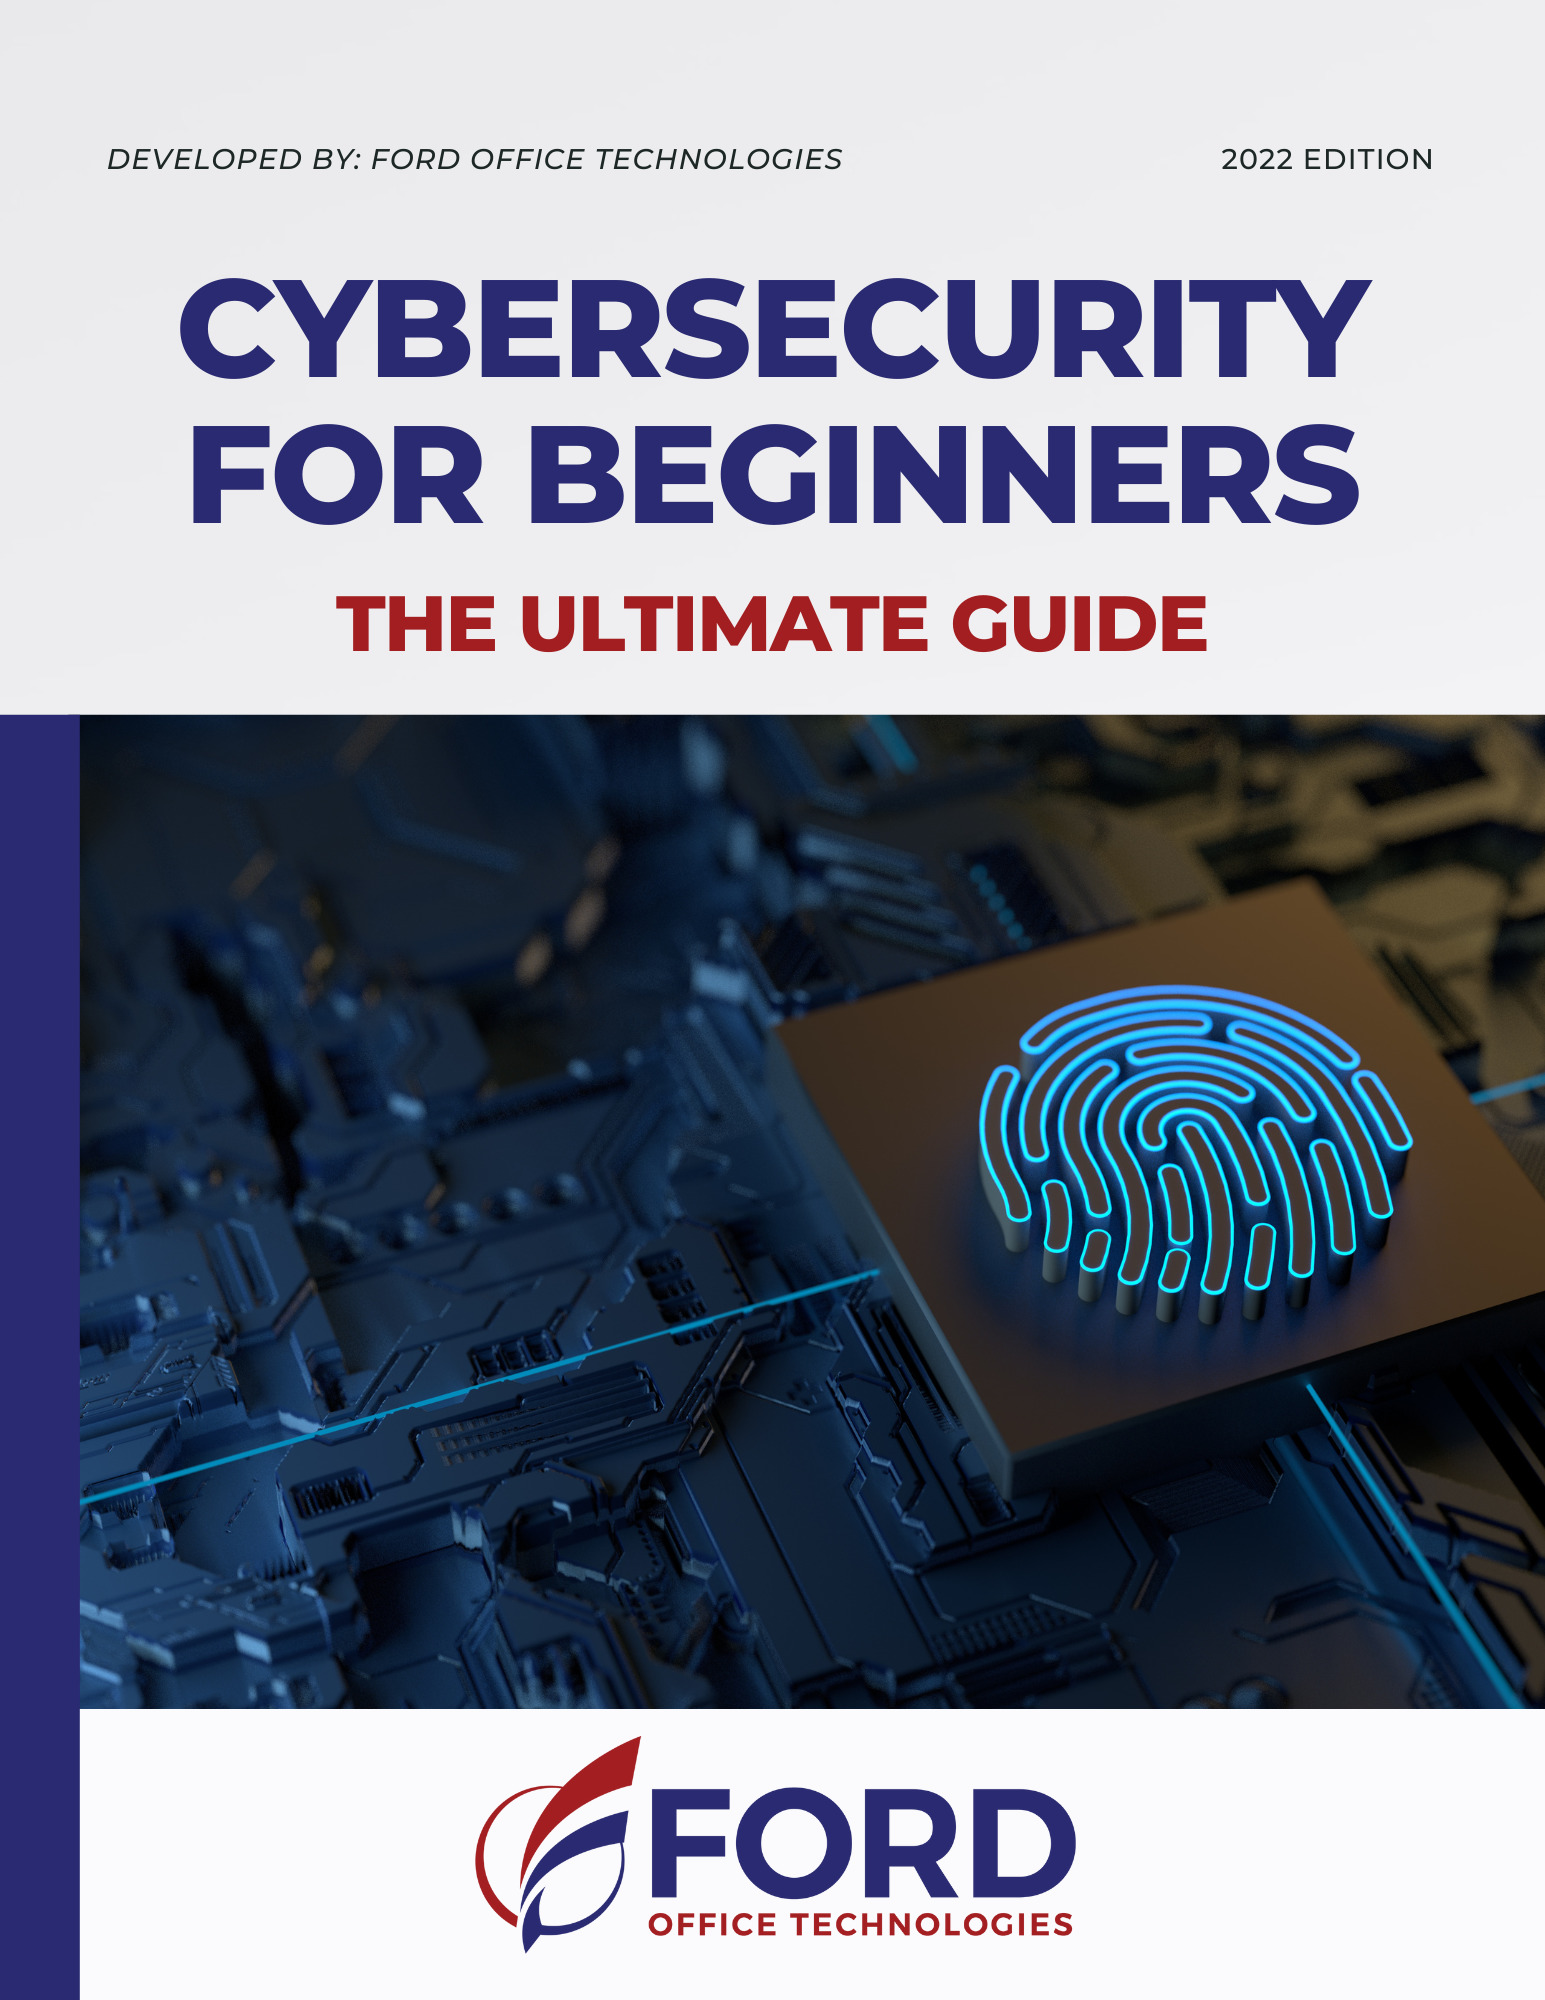 Cybersecurity for Beginners: The Ultimate Guide